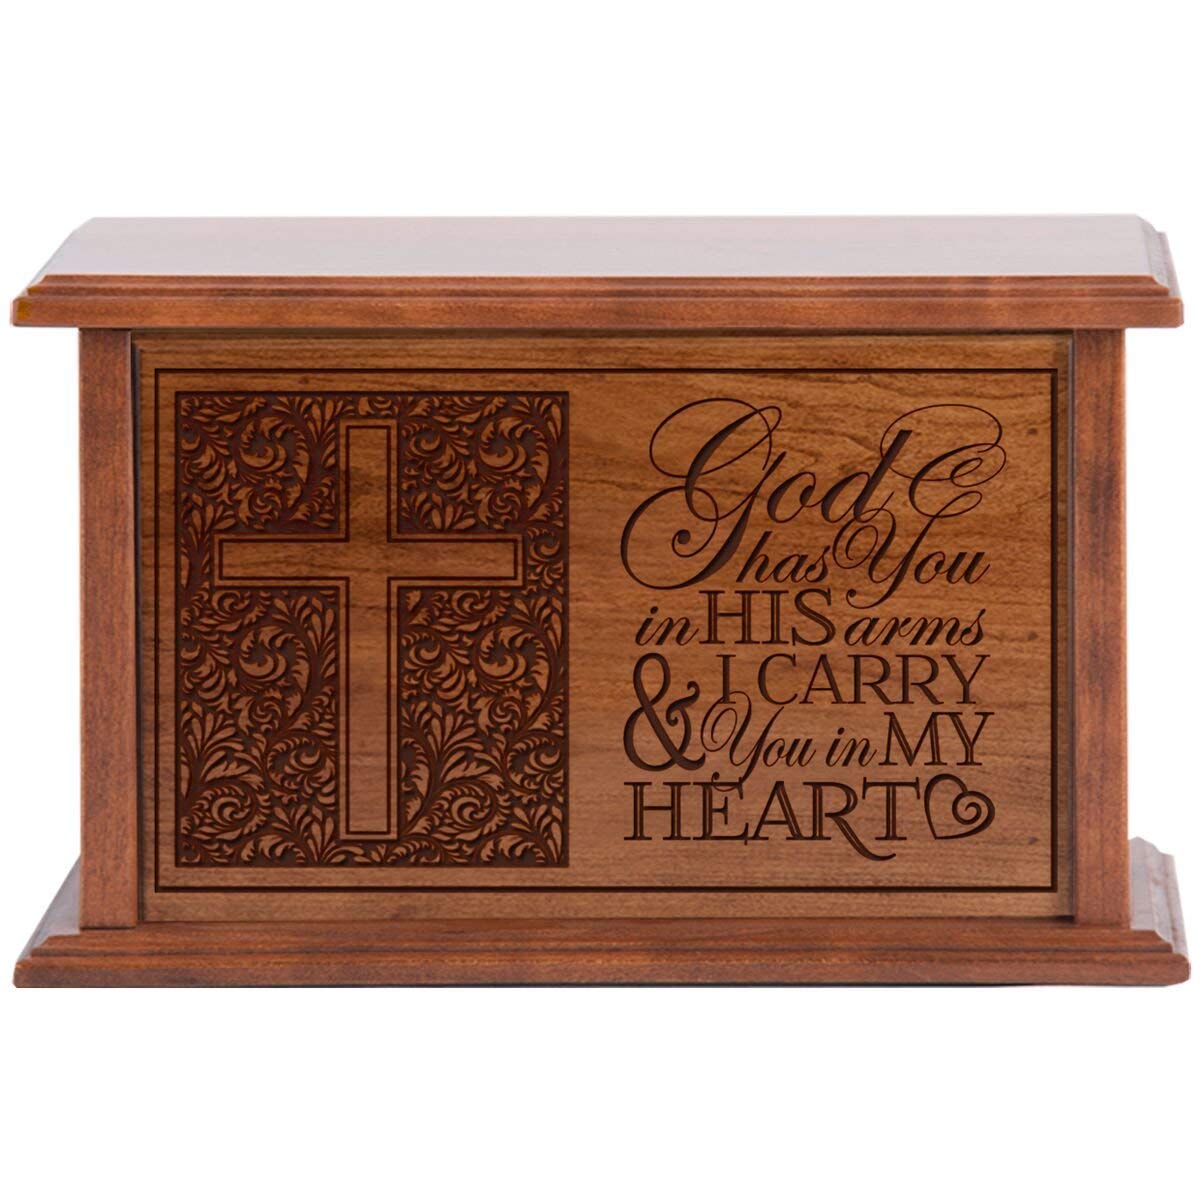 Engraved Cherry Wood Cremation Urn God Has You 10.5x7 - LifeSong Milestones